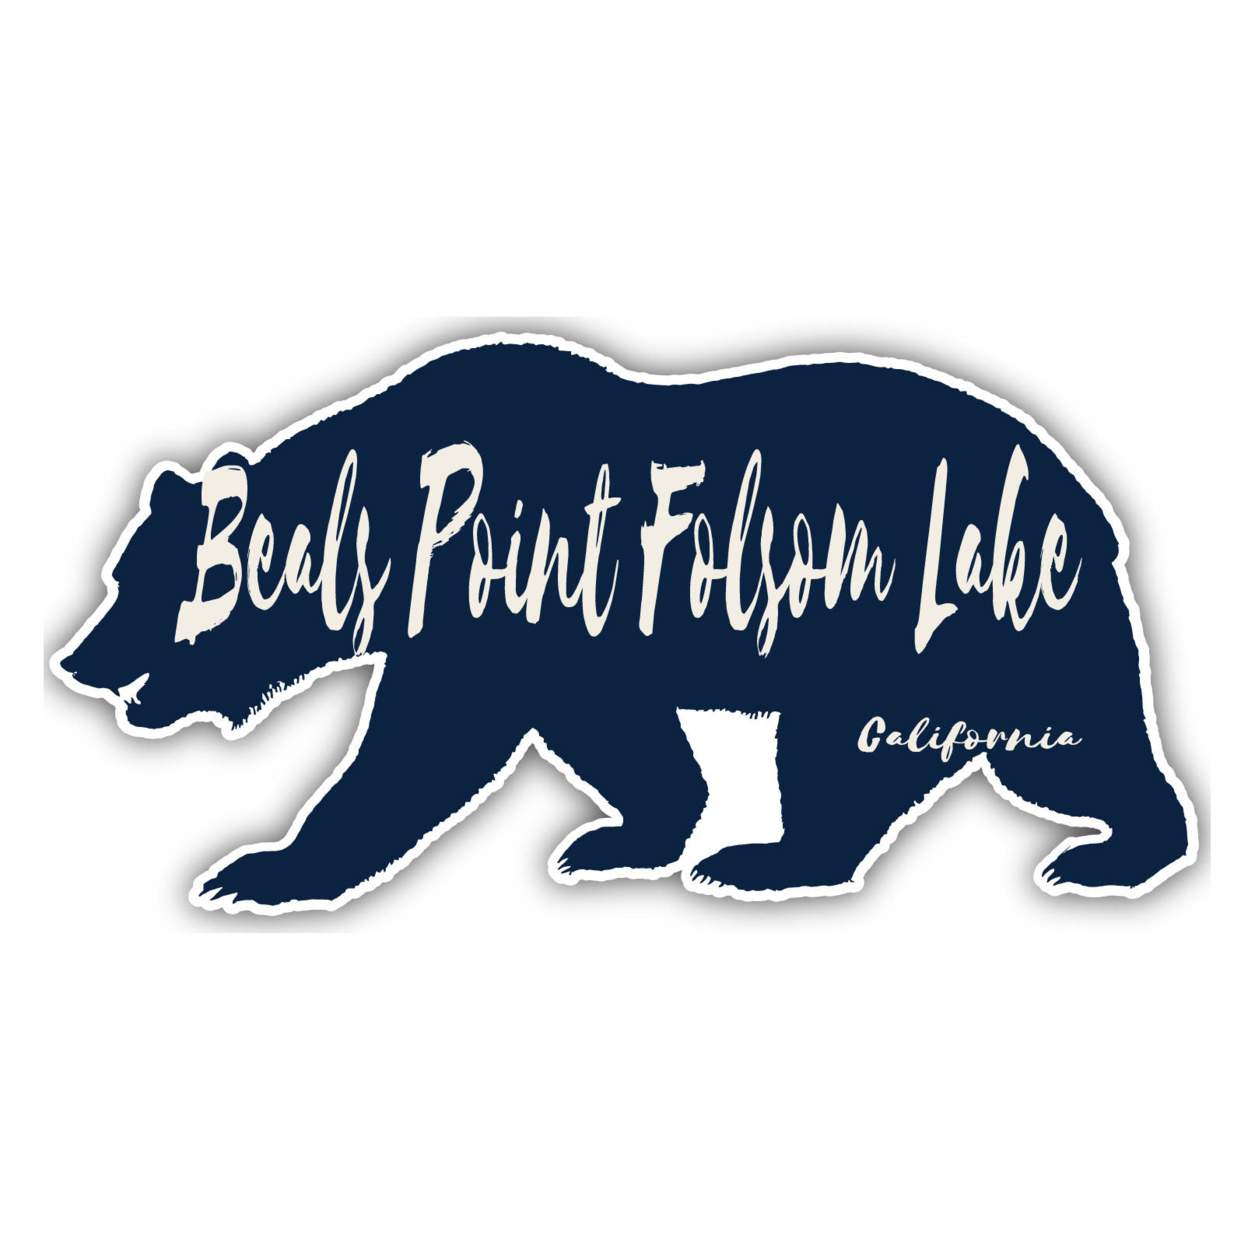 Beals Point Folsom Lake California Souvenir Decorative Stickers (Choose Theme And Size) - Single Unit, 12-Inch, Camp Life